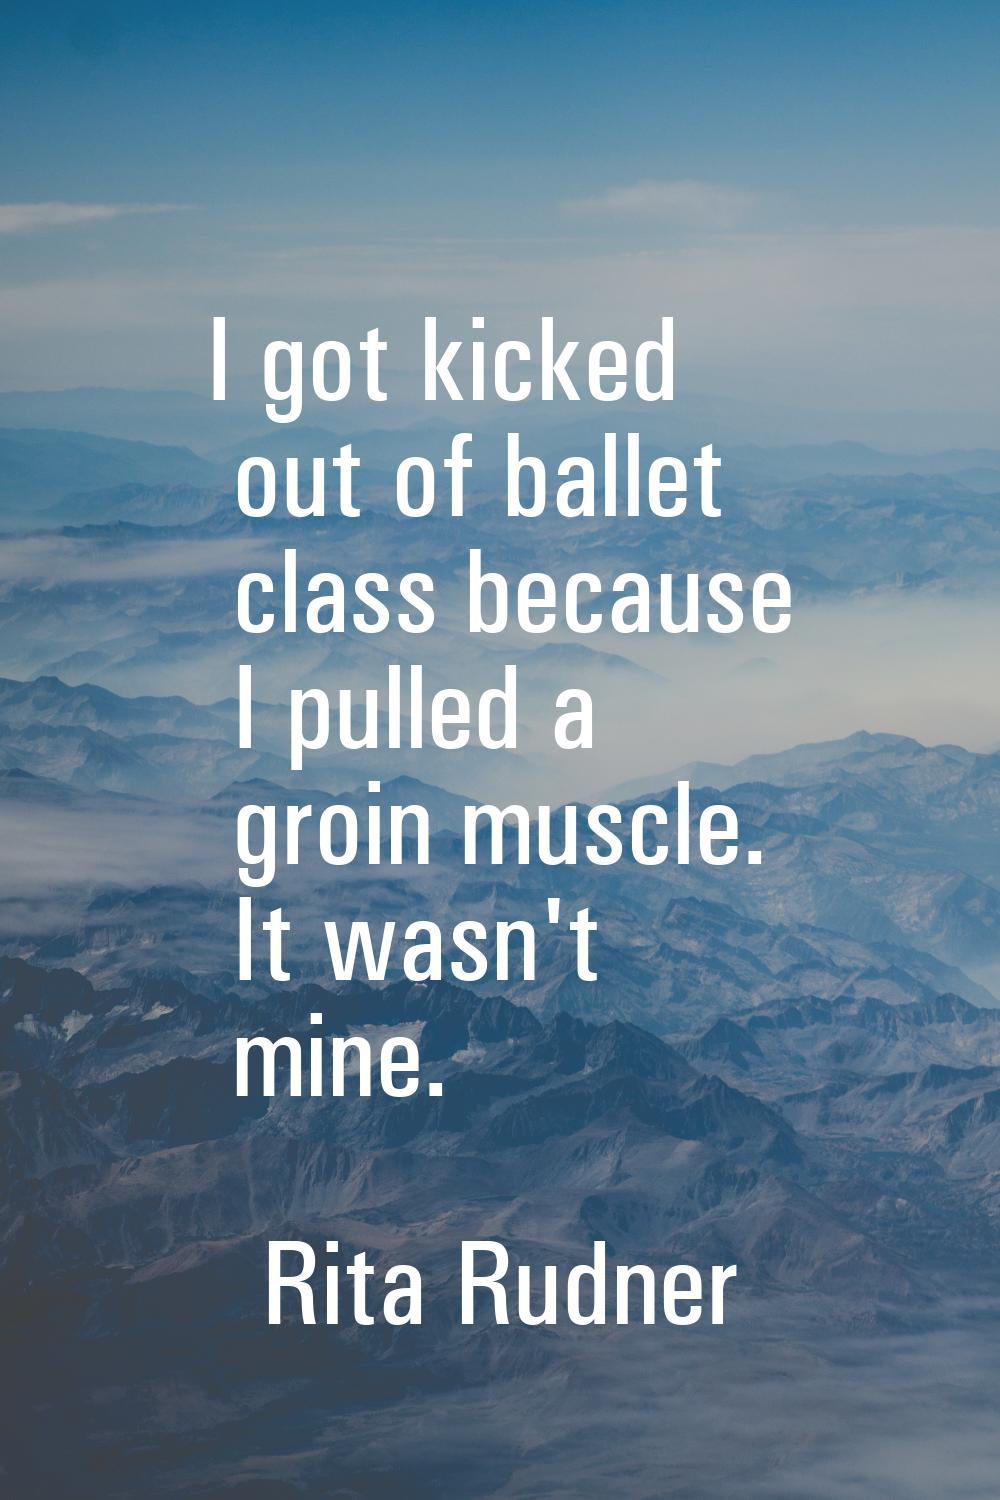 I got kicked out of ballet class because I pulled a groin muscle. It wasn't mine.